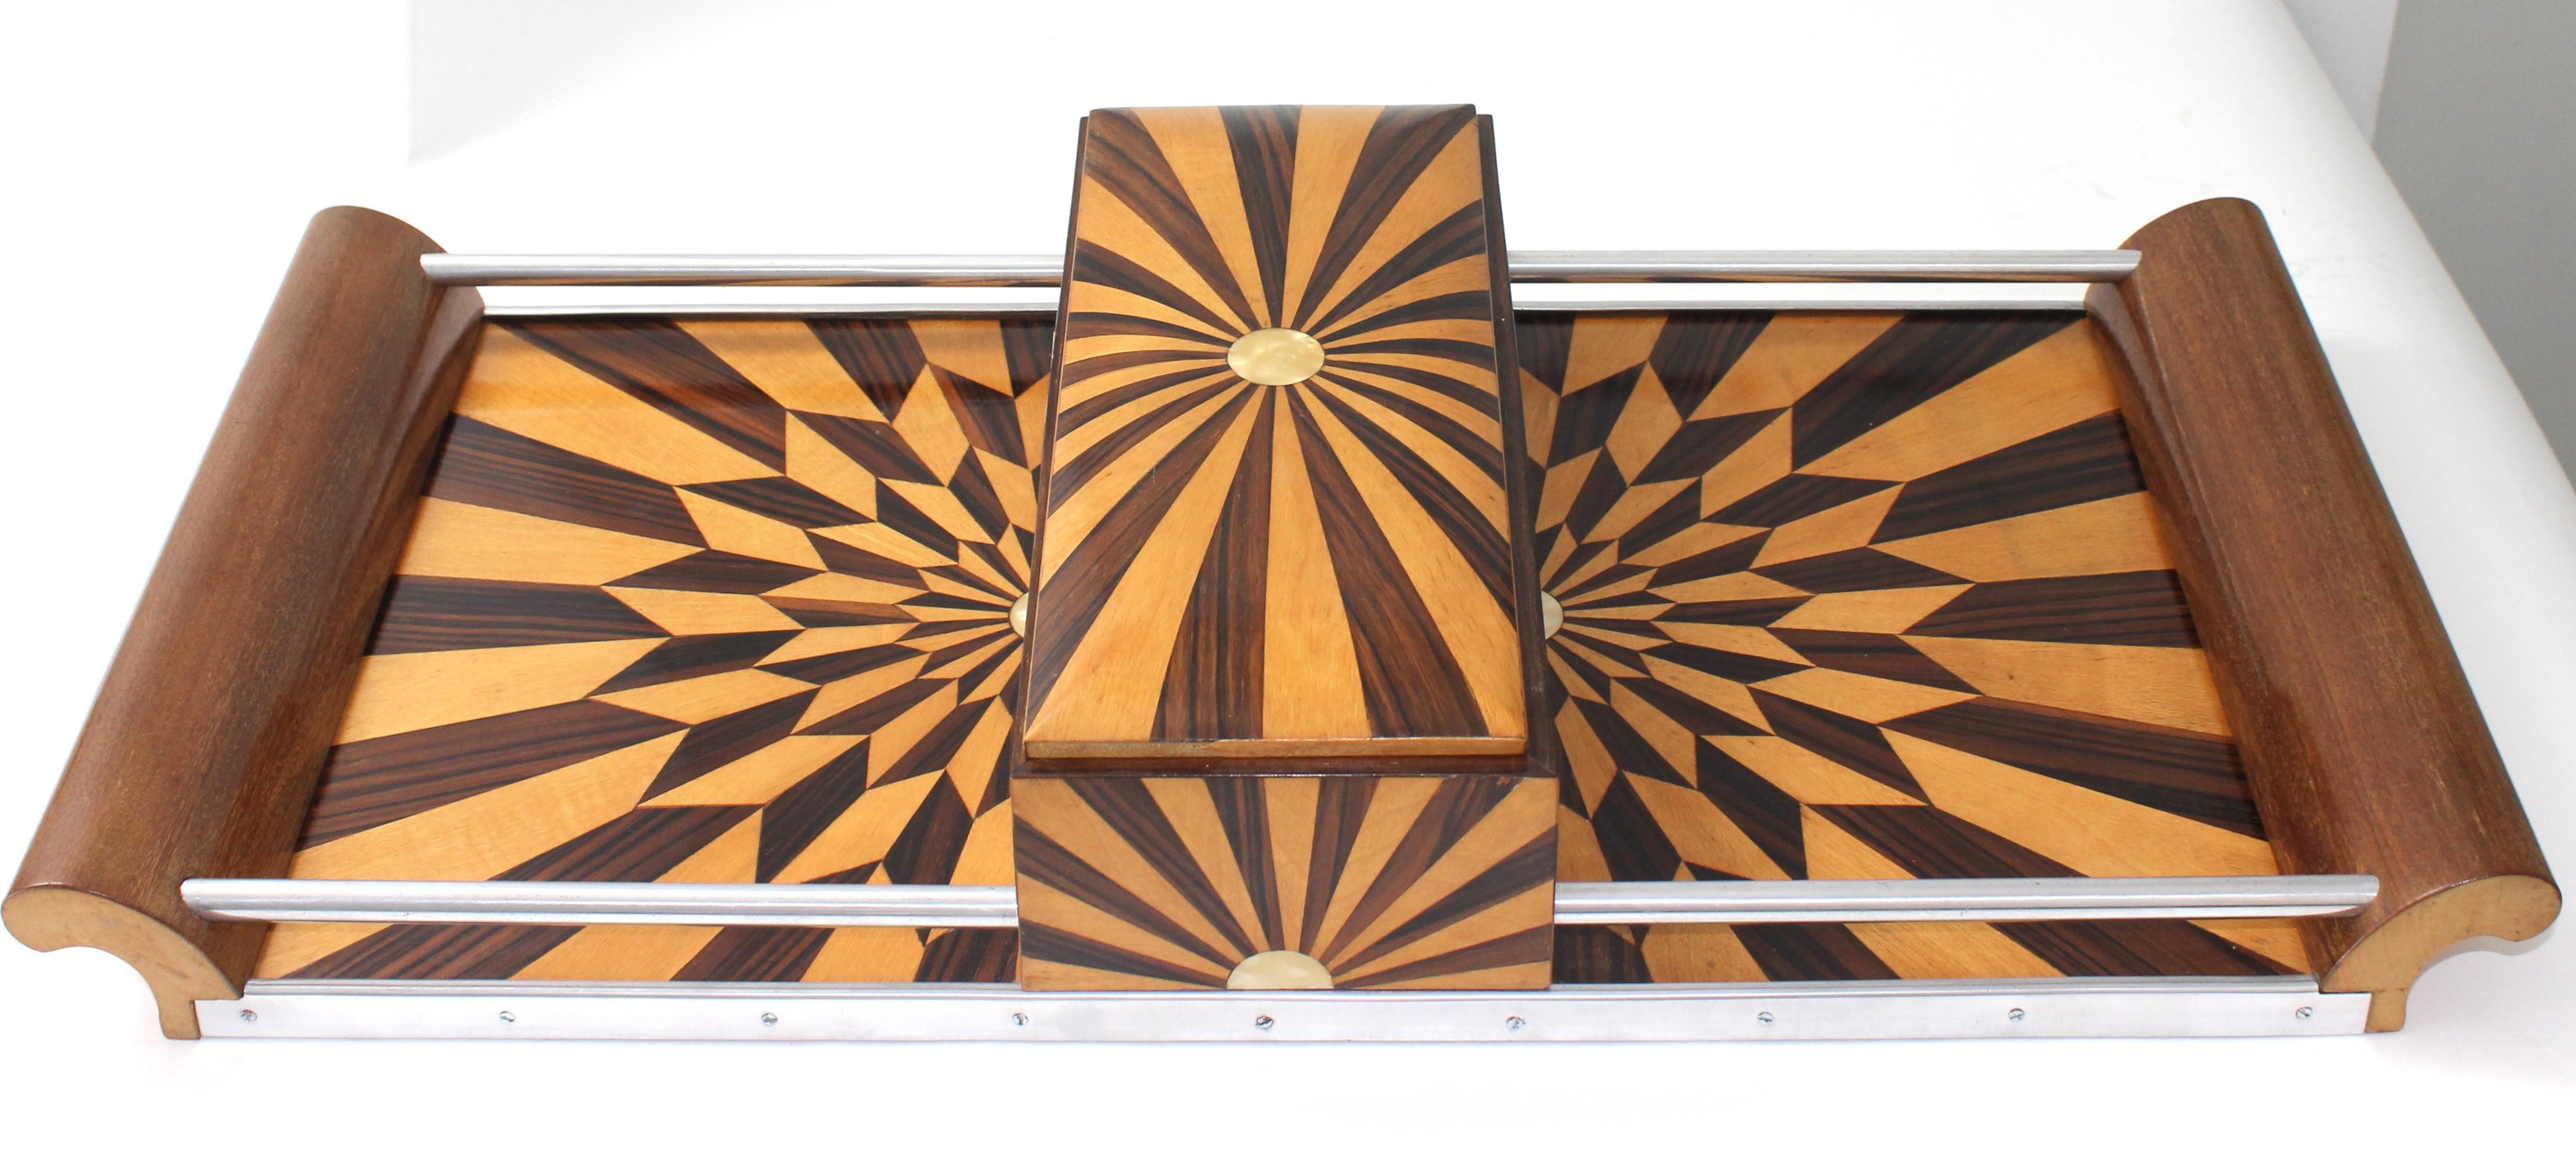 Art Deco 1920s Paul Giordano Paris serving tray Exotic Wood Parquet from a Palm Beach estate.

Overall size 23.25 x 11.25 x 3 7/8 high
Size of the raised covered box in the center is 4 3/4 x 11 x 3 1/4 high.